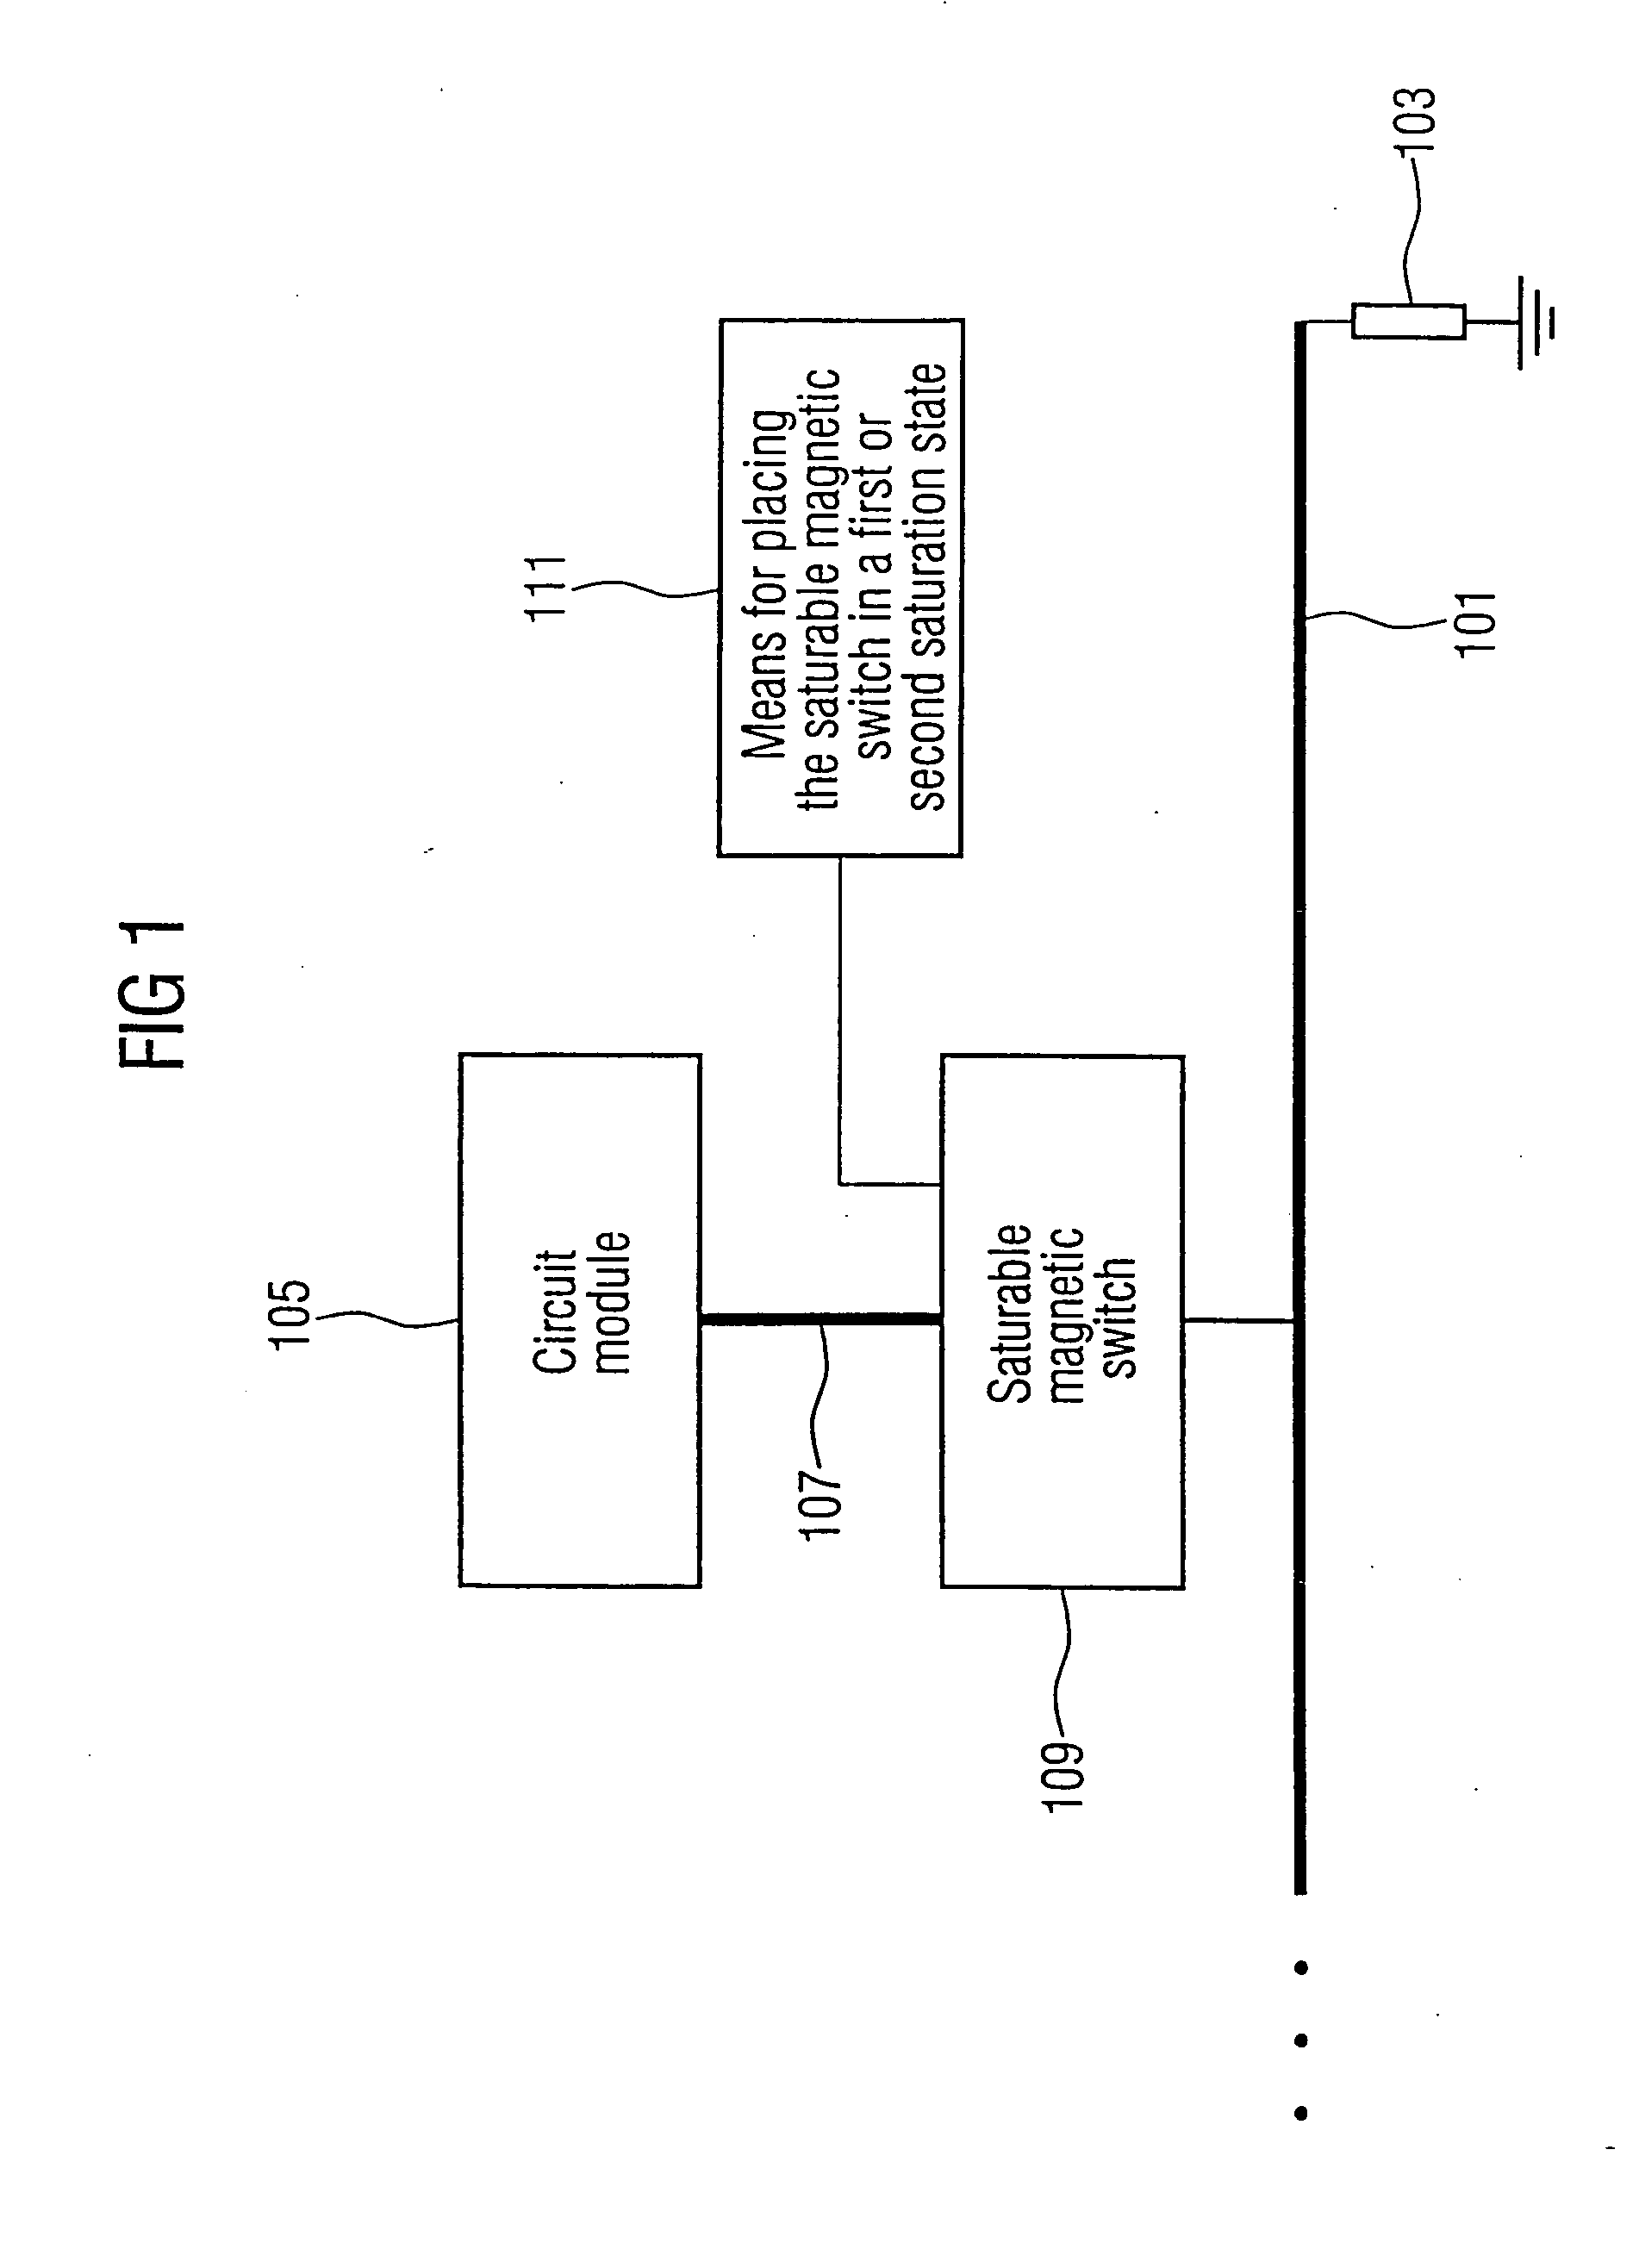 Circuit system and method for coupling a circuit module to or for decoupling the same from a main bus